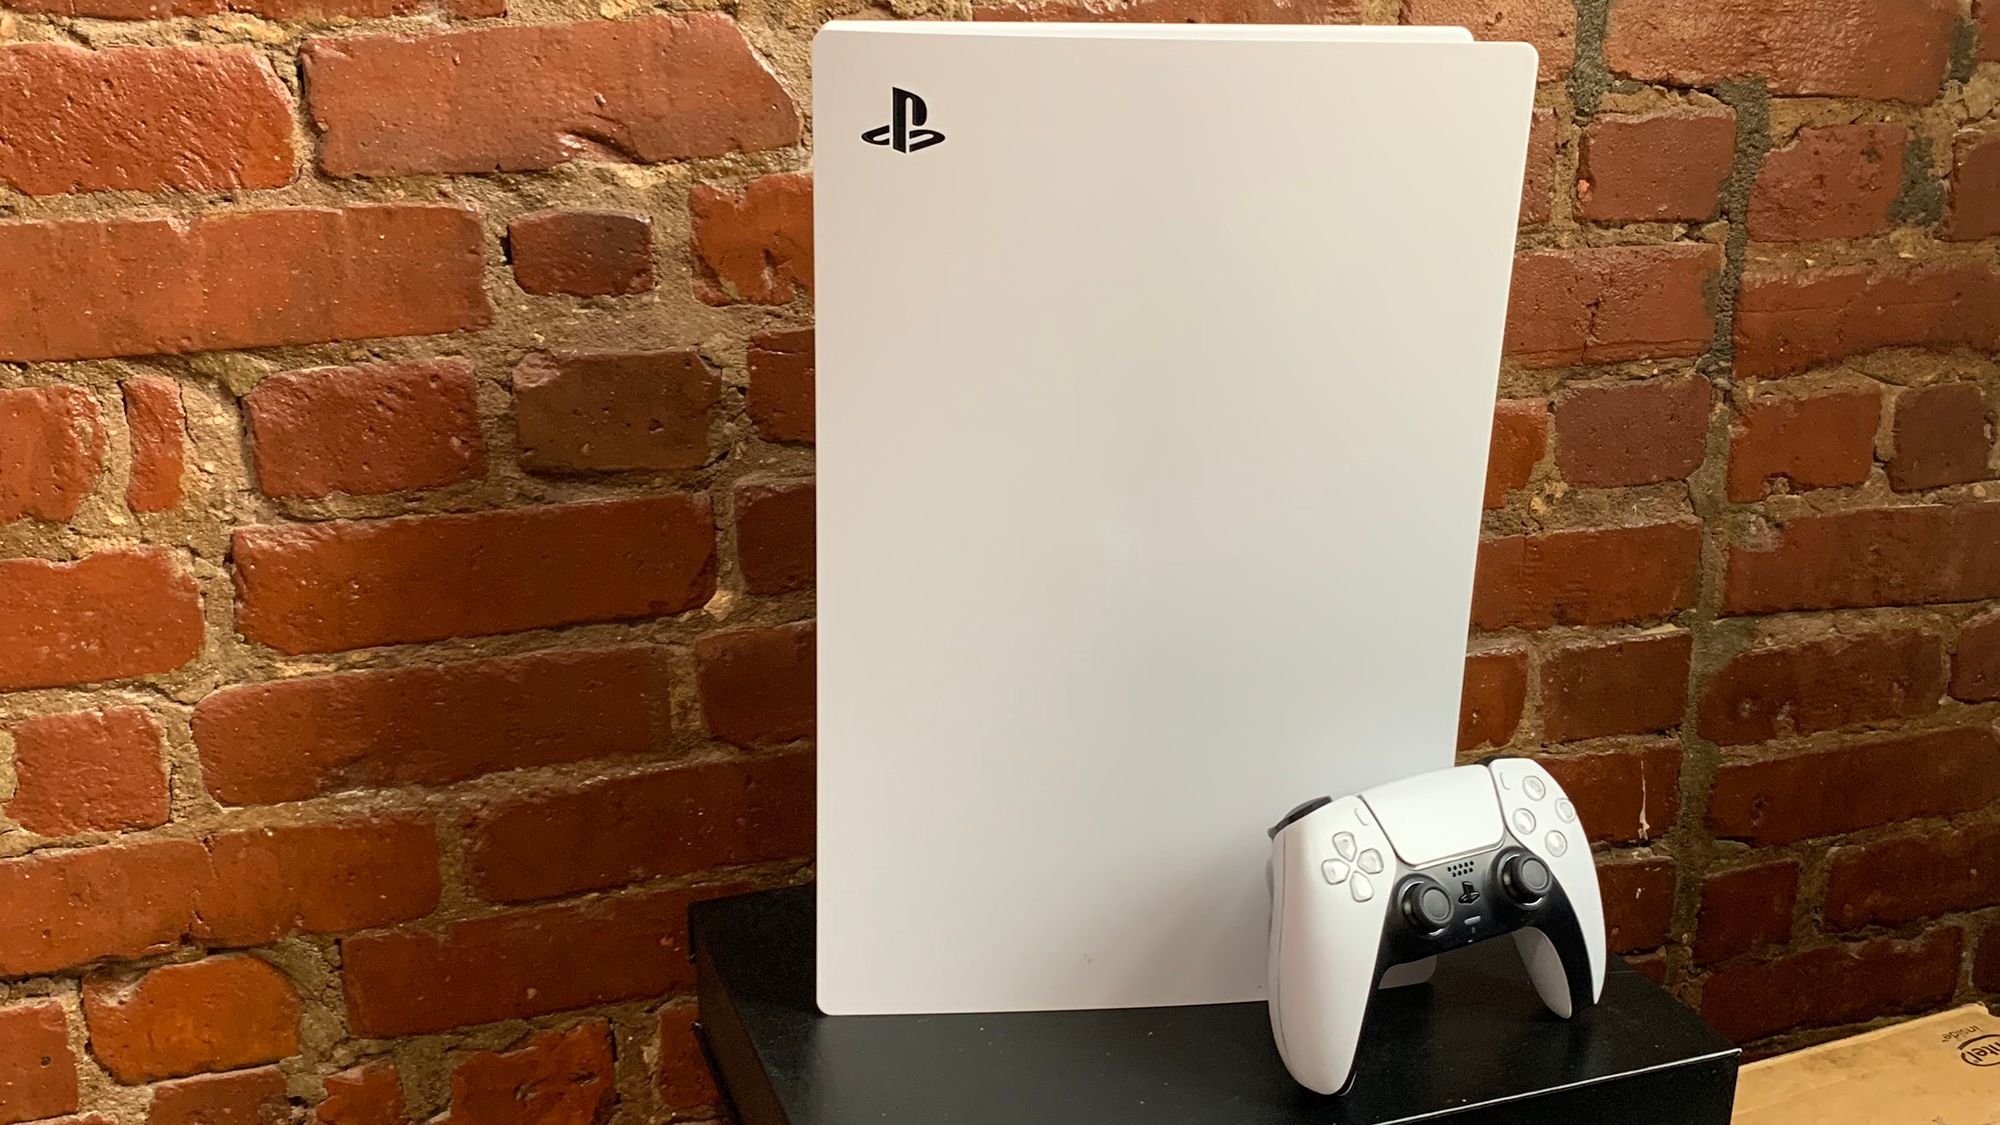 ps5 gaming console in front of a brick wall